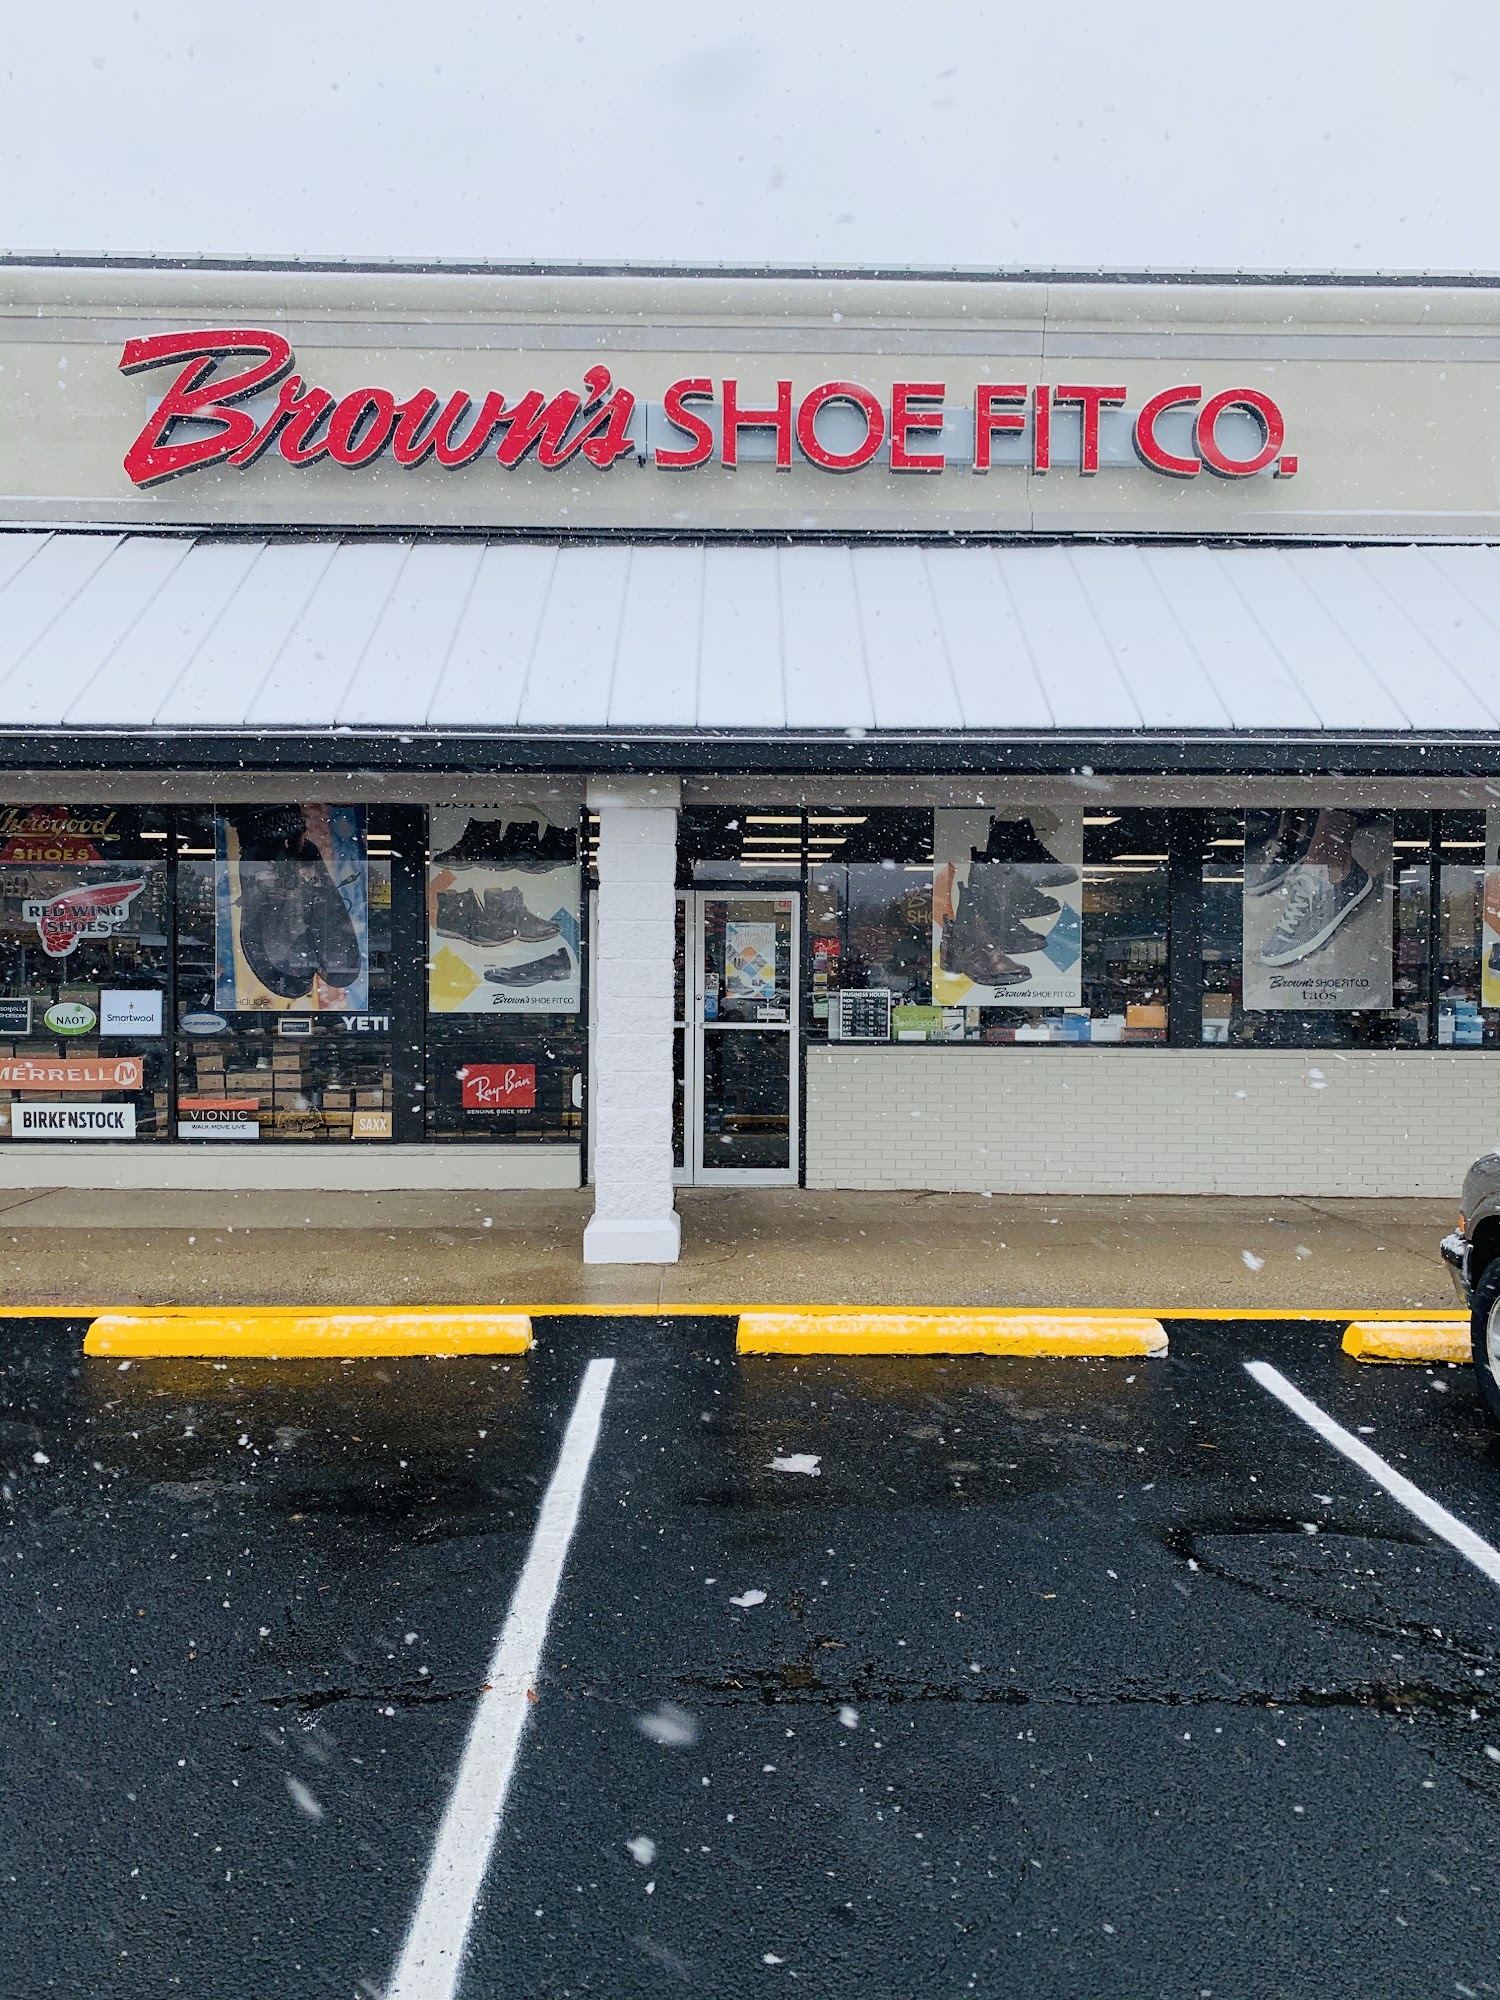 Brown's Shoe Fit Co.